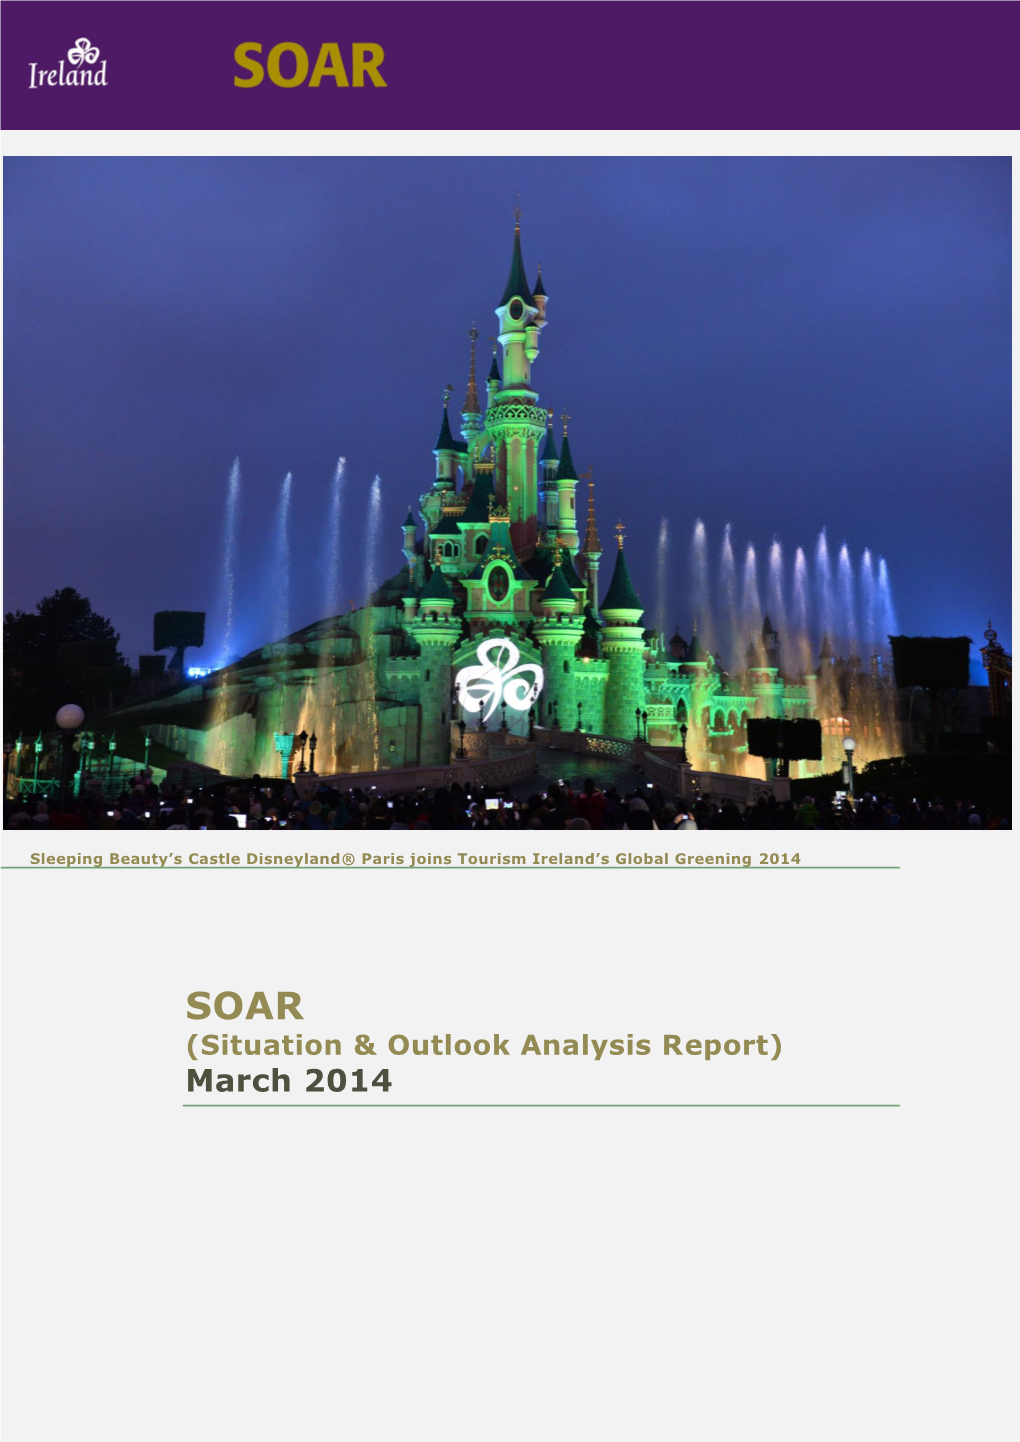 SOAR (Situation & Outlook Analysis Report) March 2014